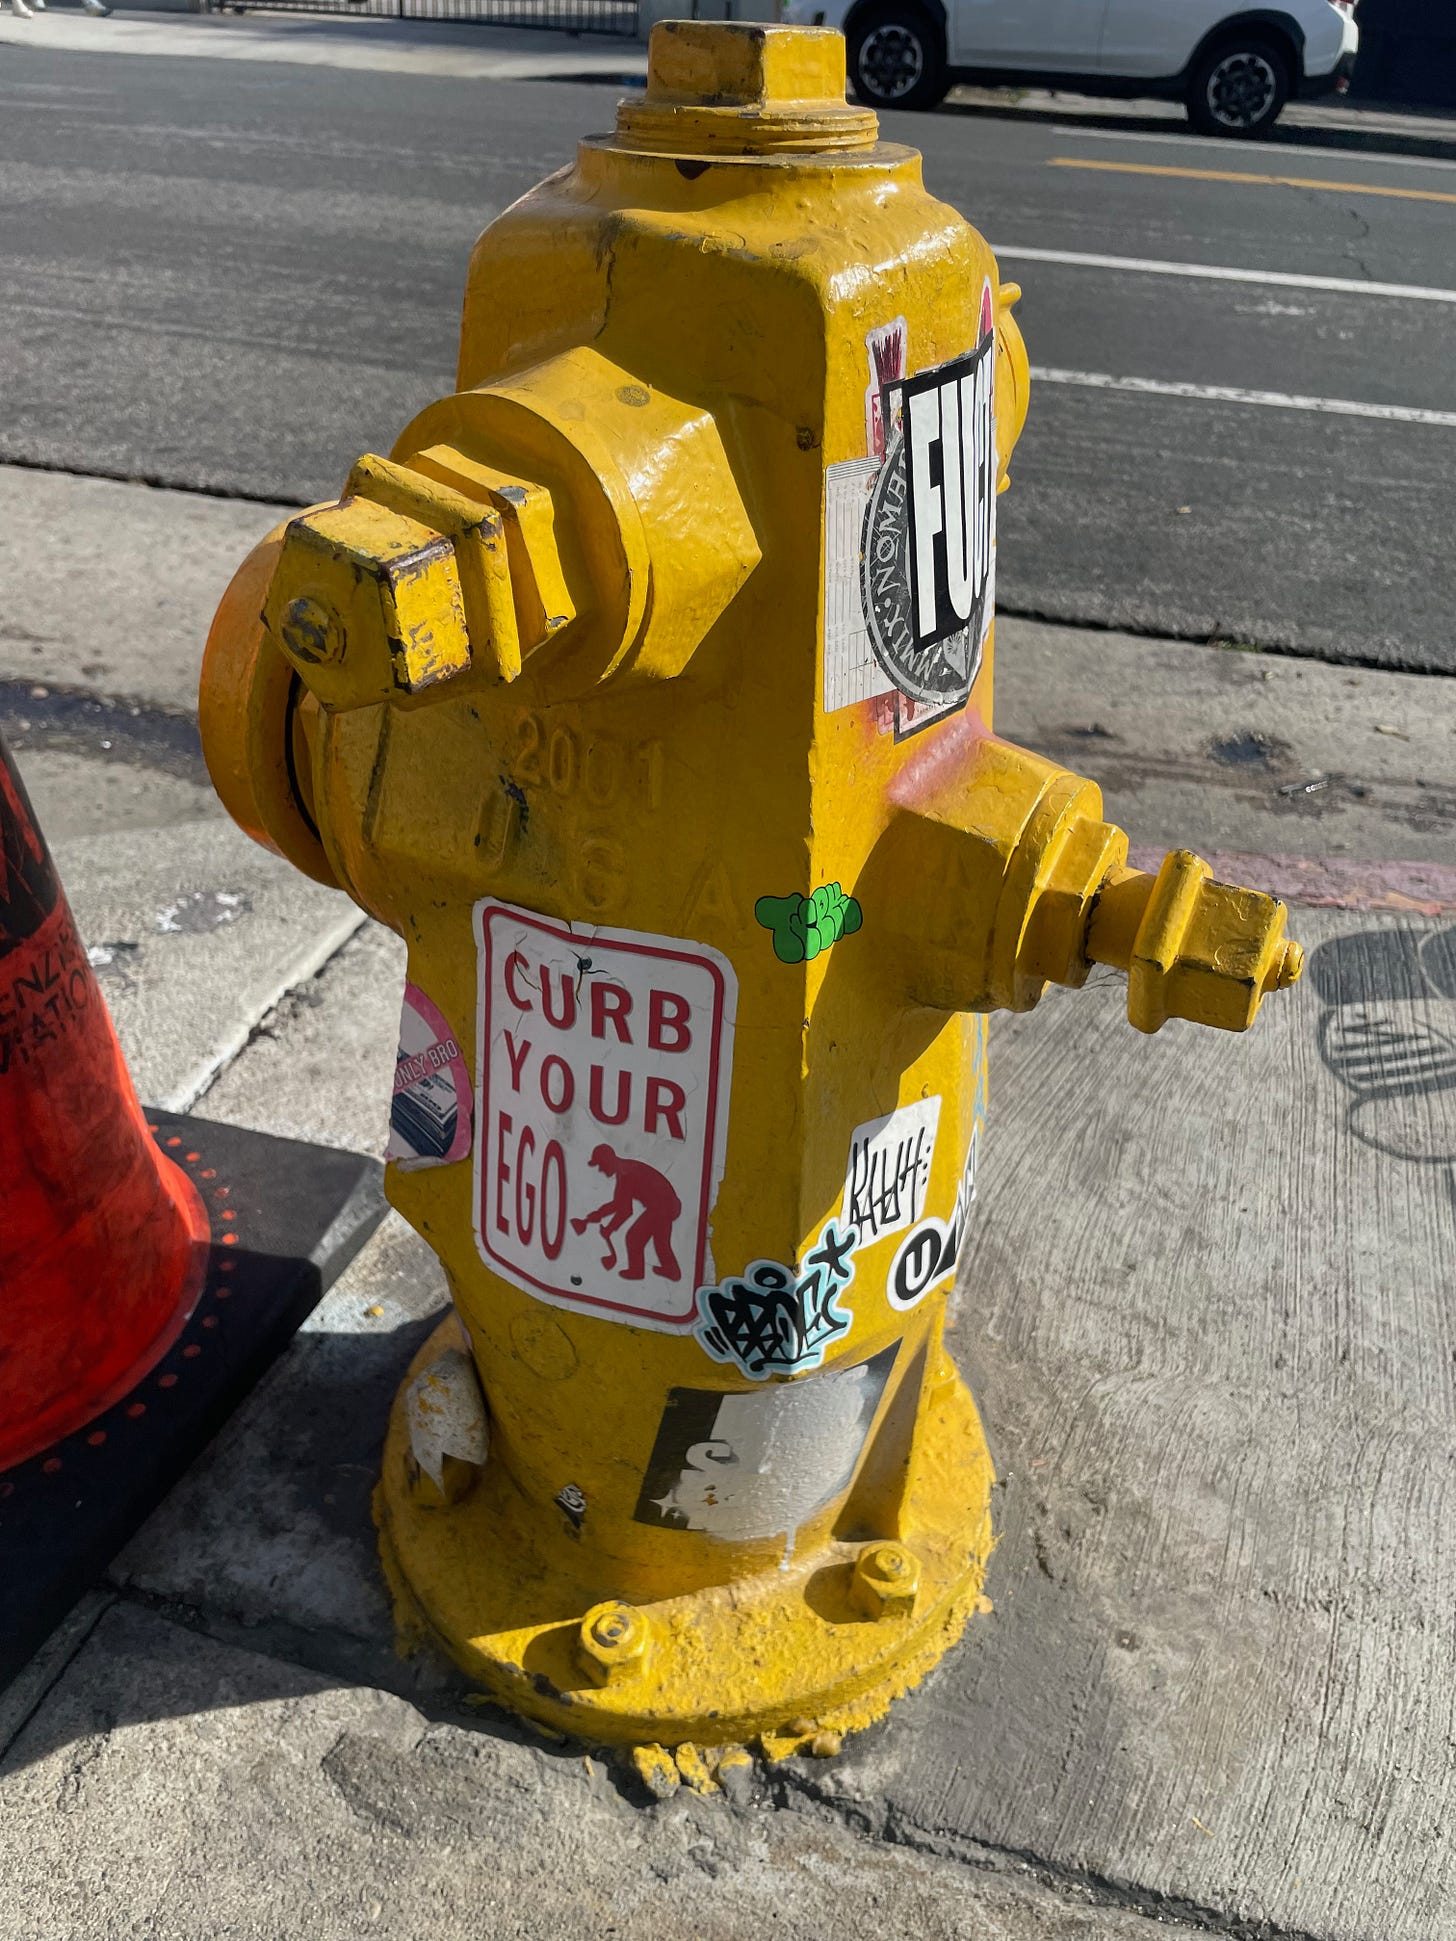 a yellow fire hydrant covered in stickers, one of which says, "Curb your ego."